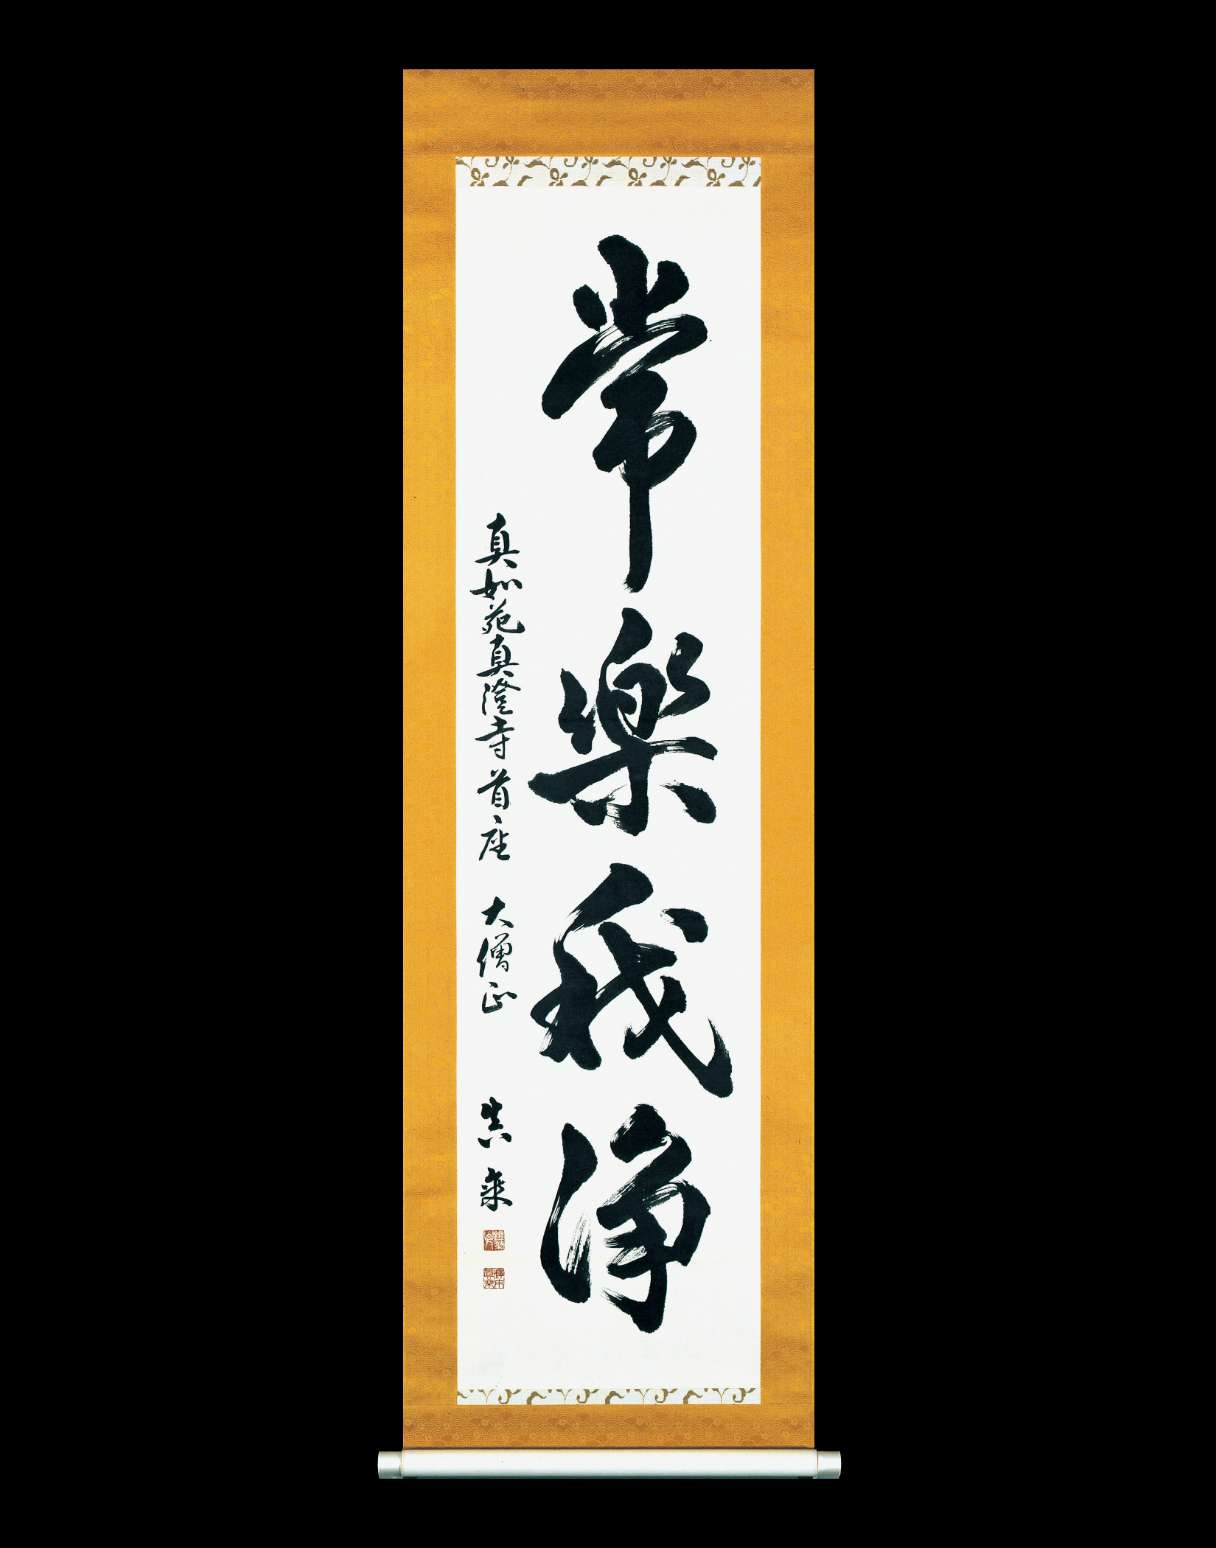 Large, bold Japanese calligraphy is written vertically on a paper scroll with an amber border, filling almost all of the space; to the left there is a vertical line of calligraphy in a smaller hand.